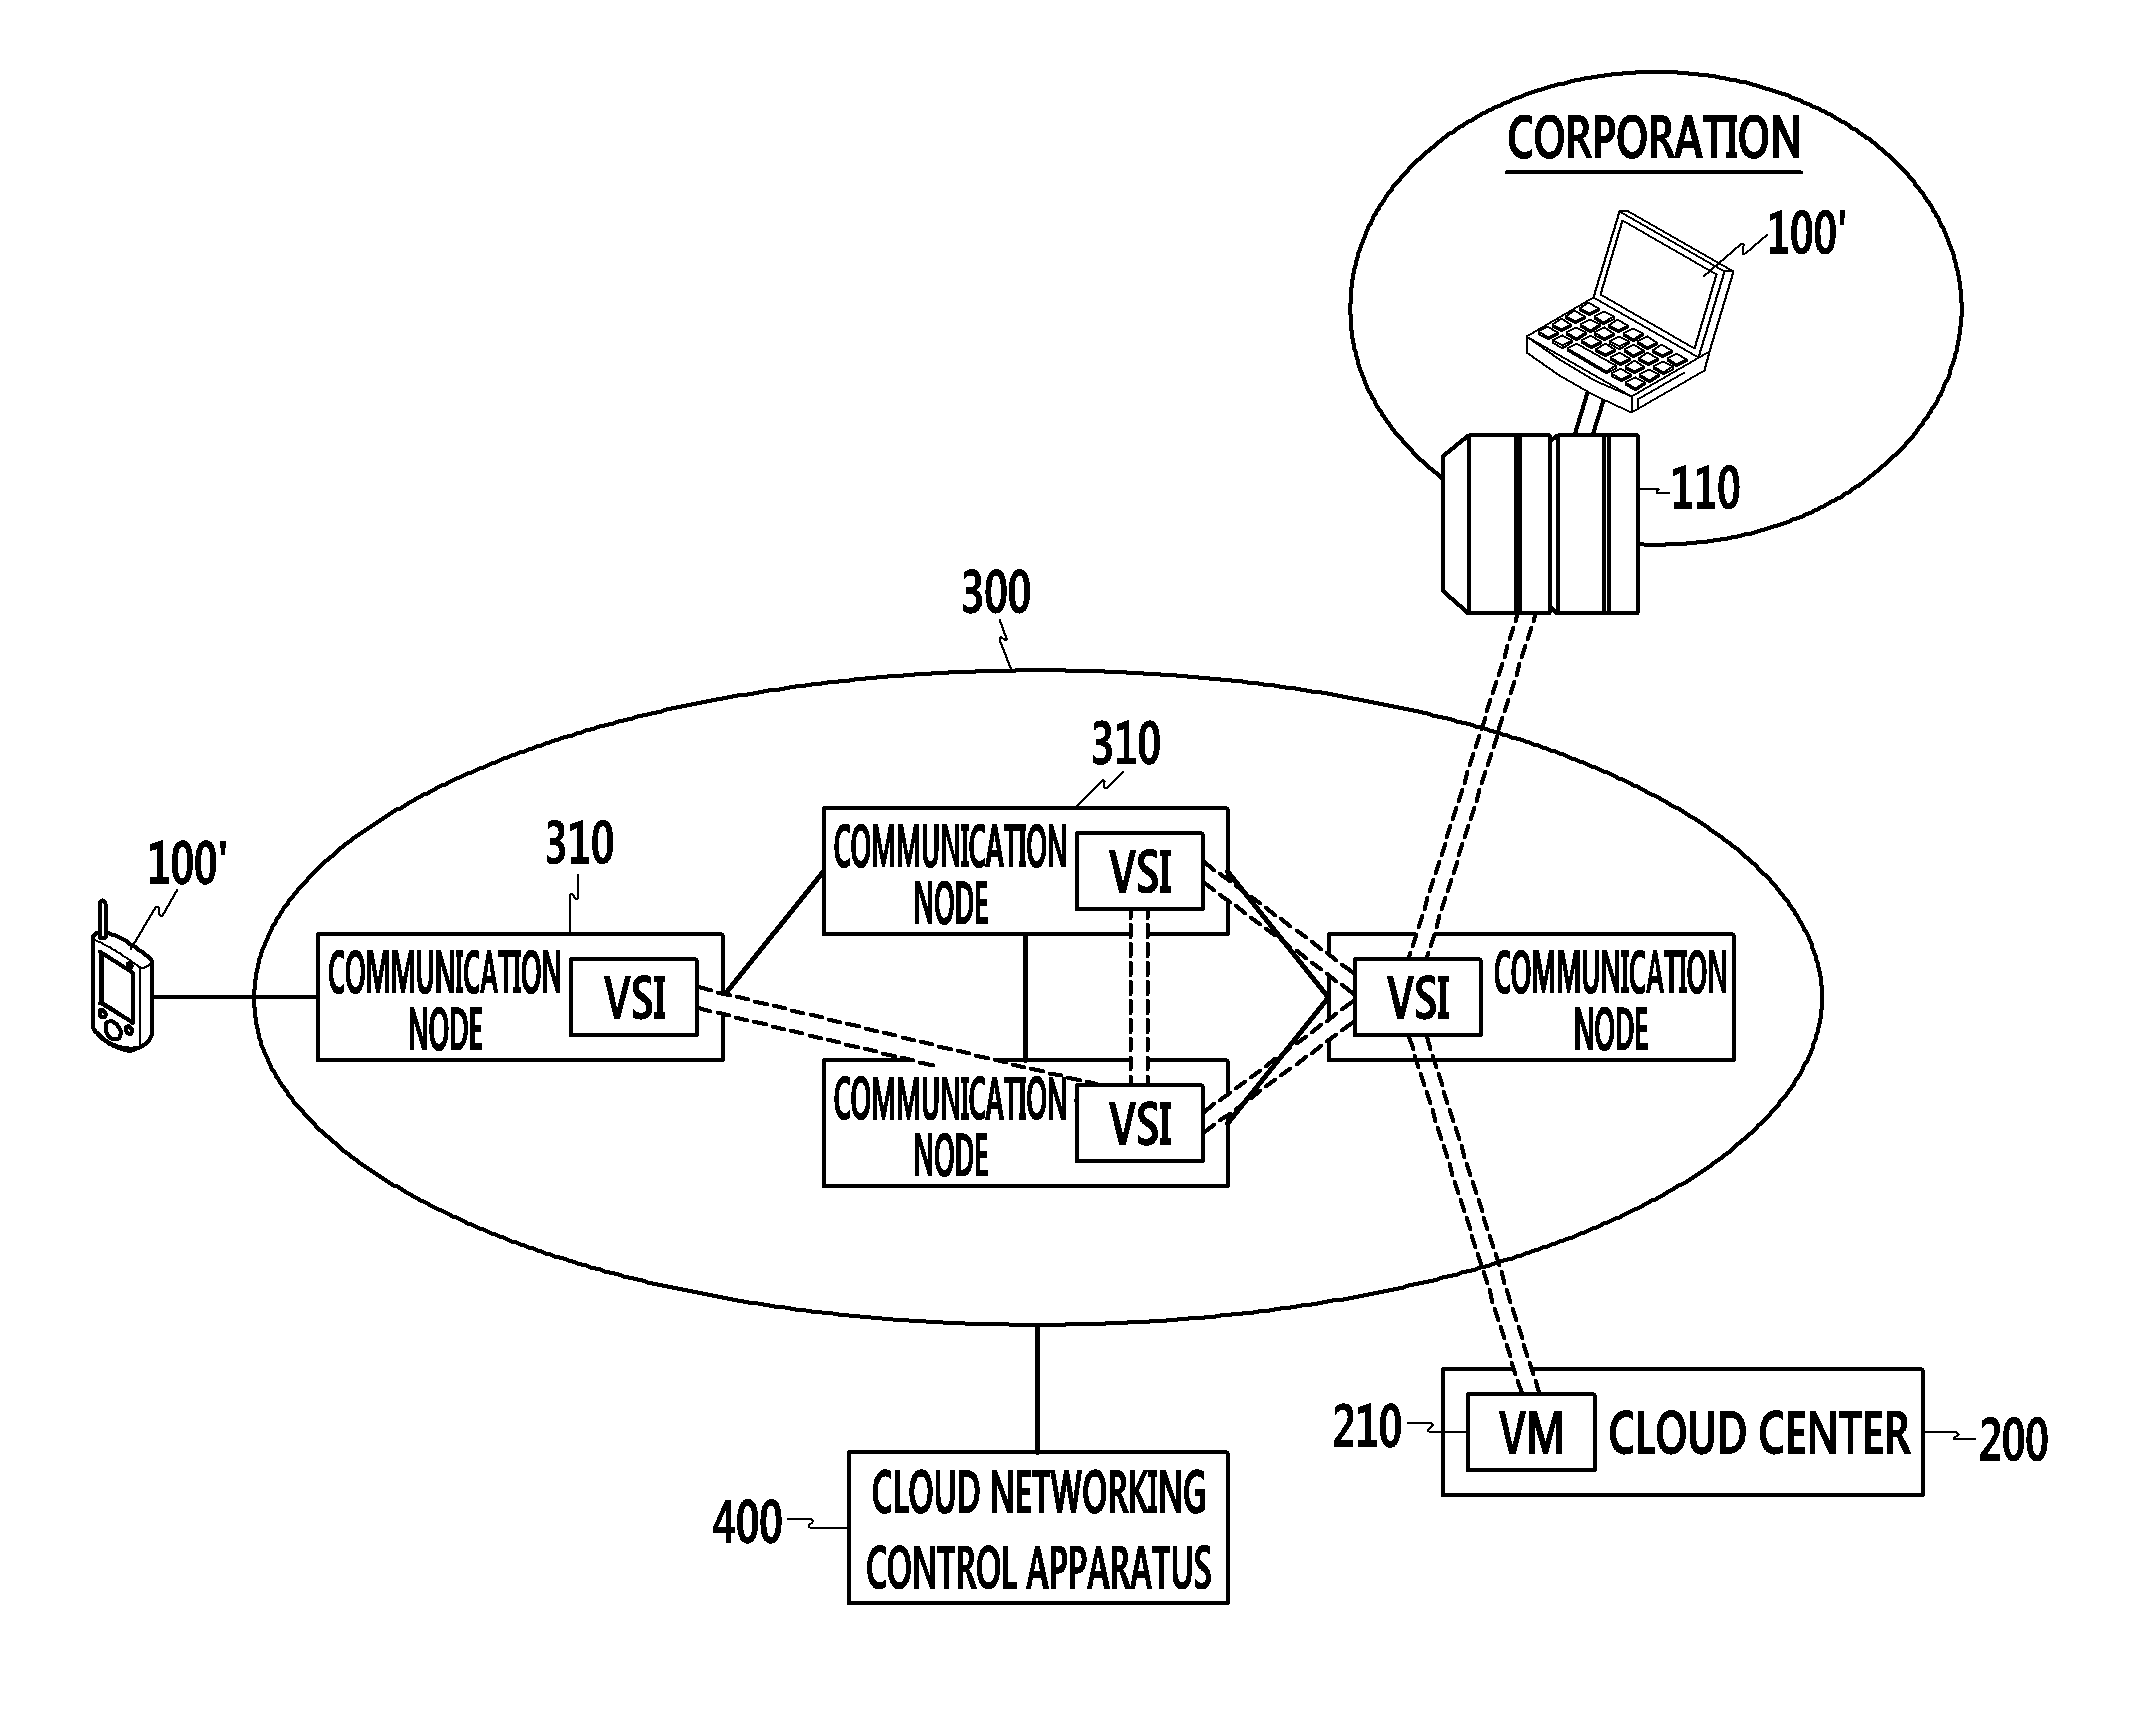 Apparatus and method for cloud networking